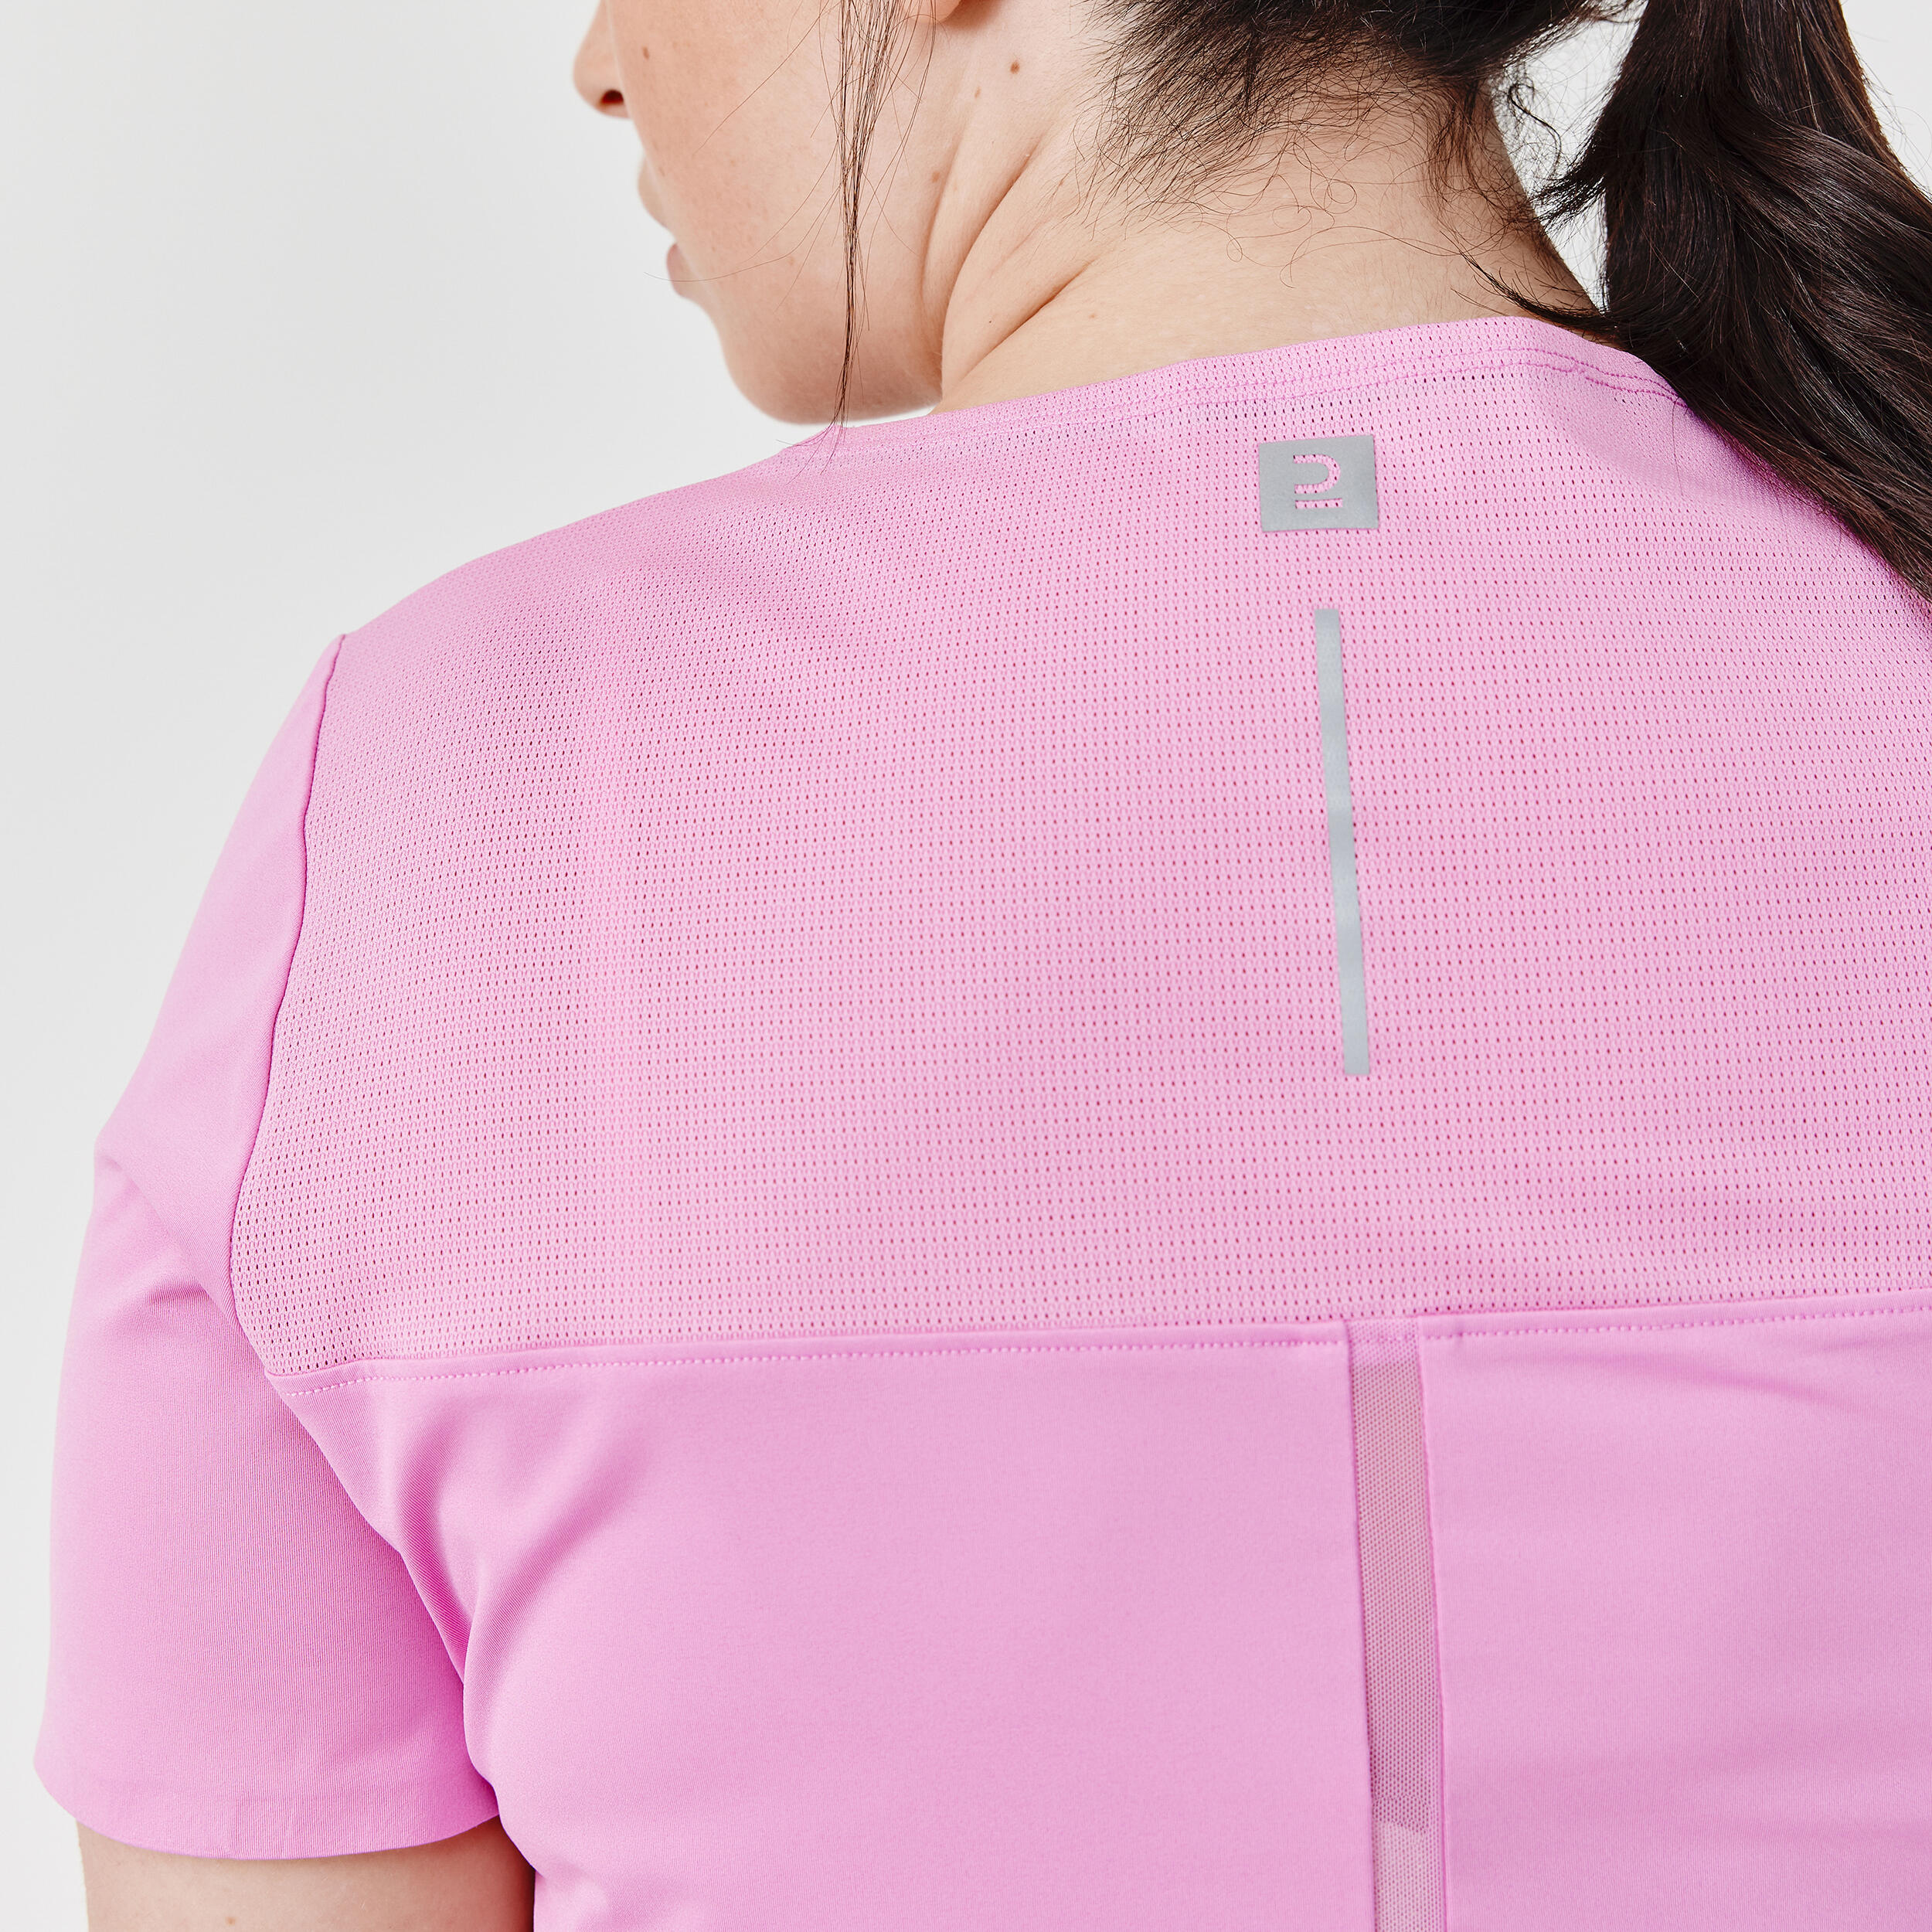 Women's breathable running T-shirt Dry+ Breath - pink 4/6